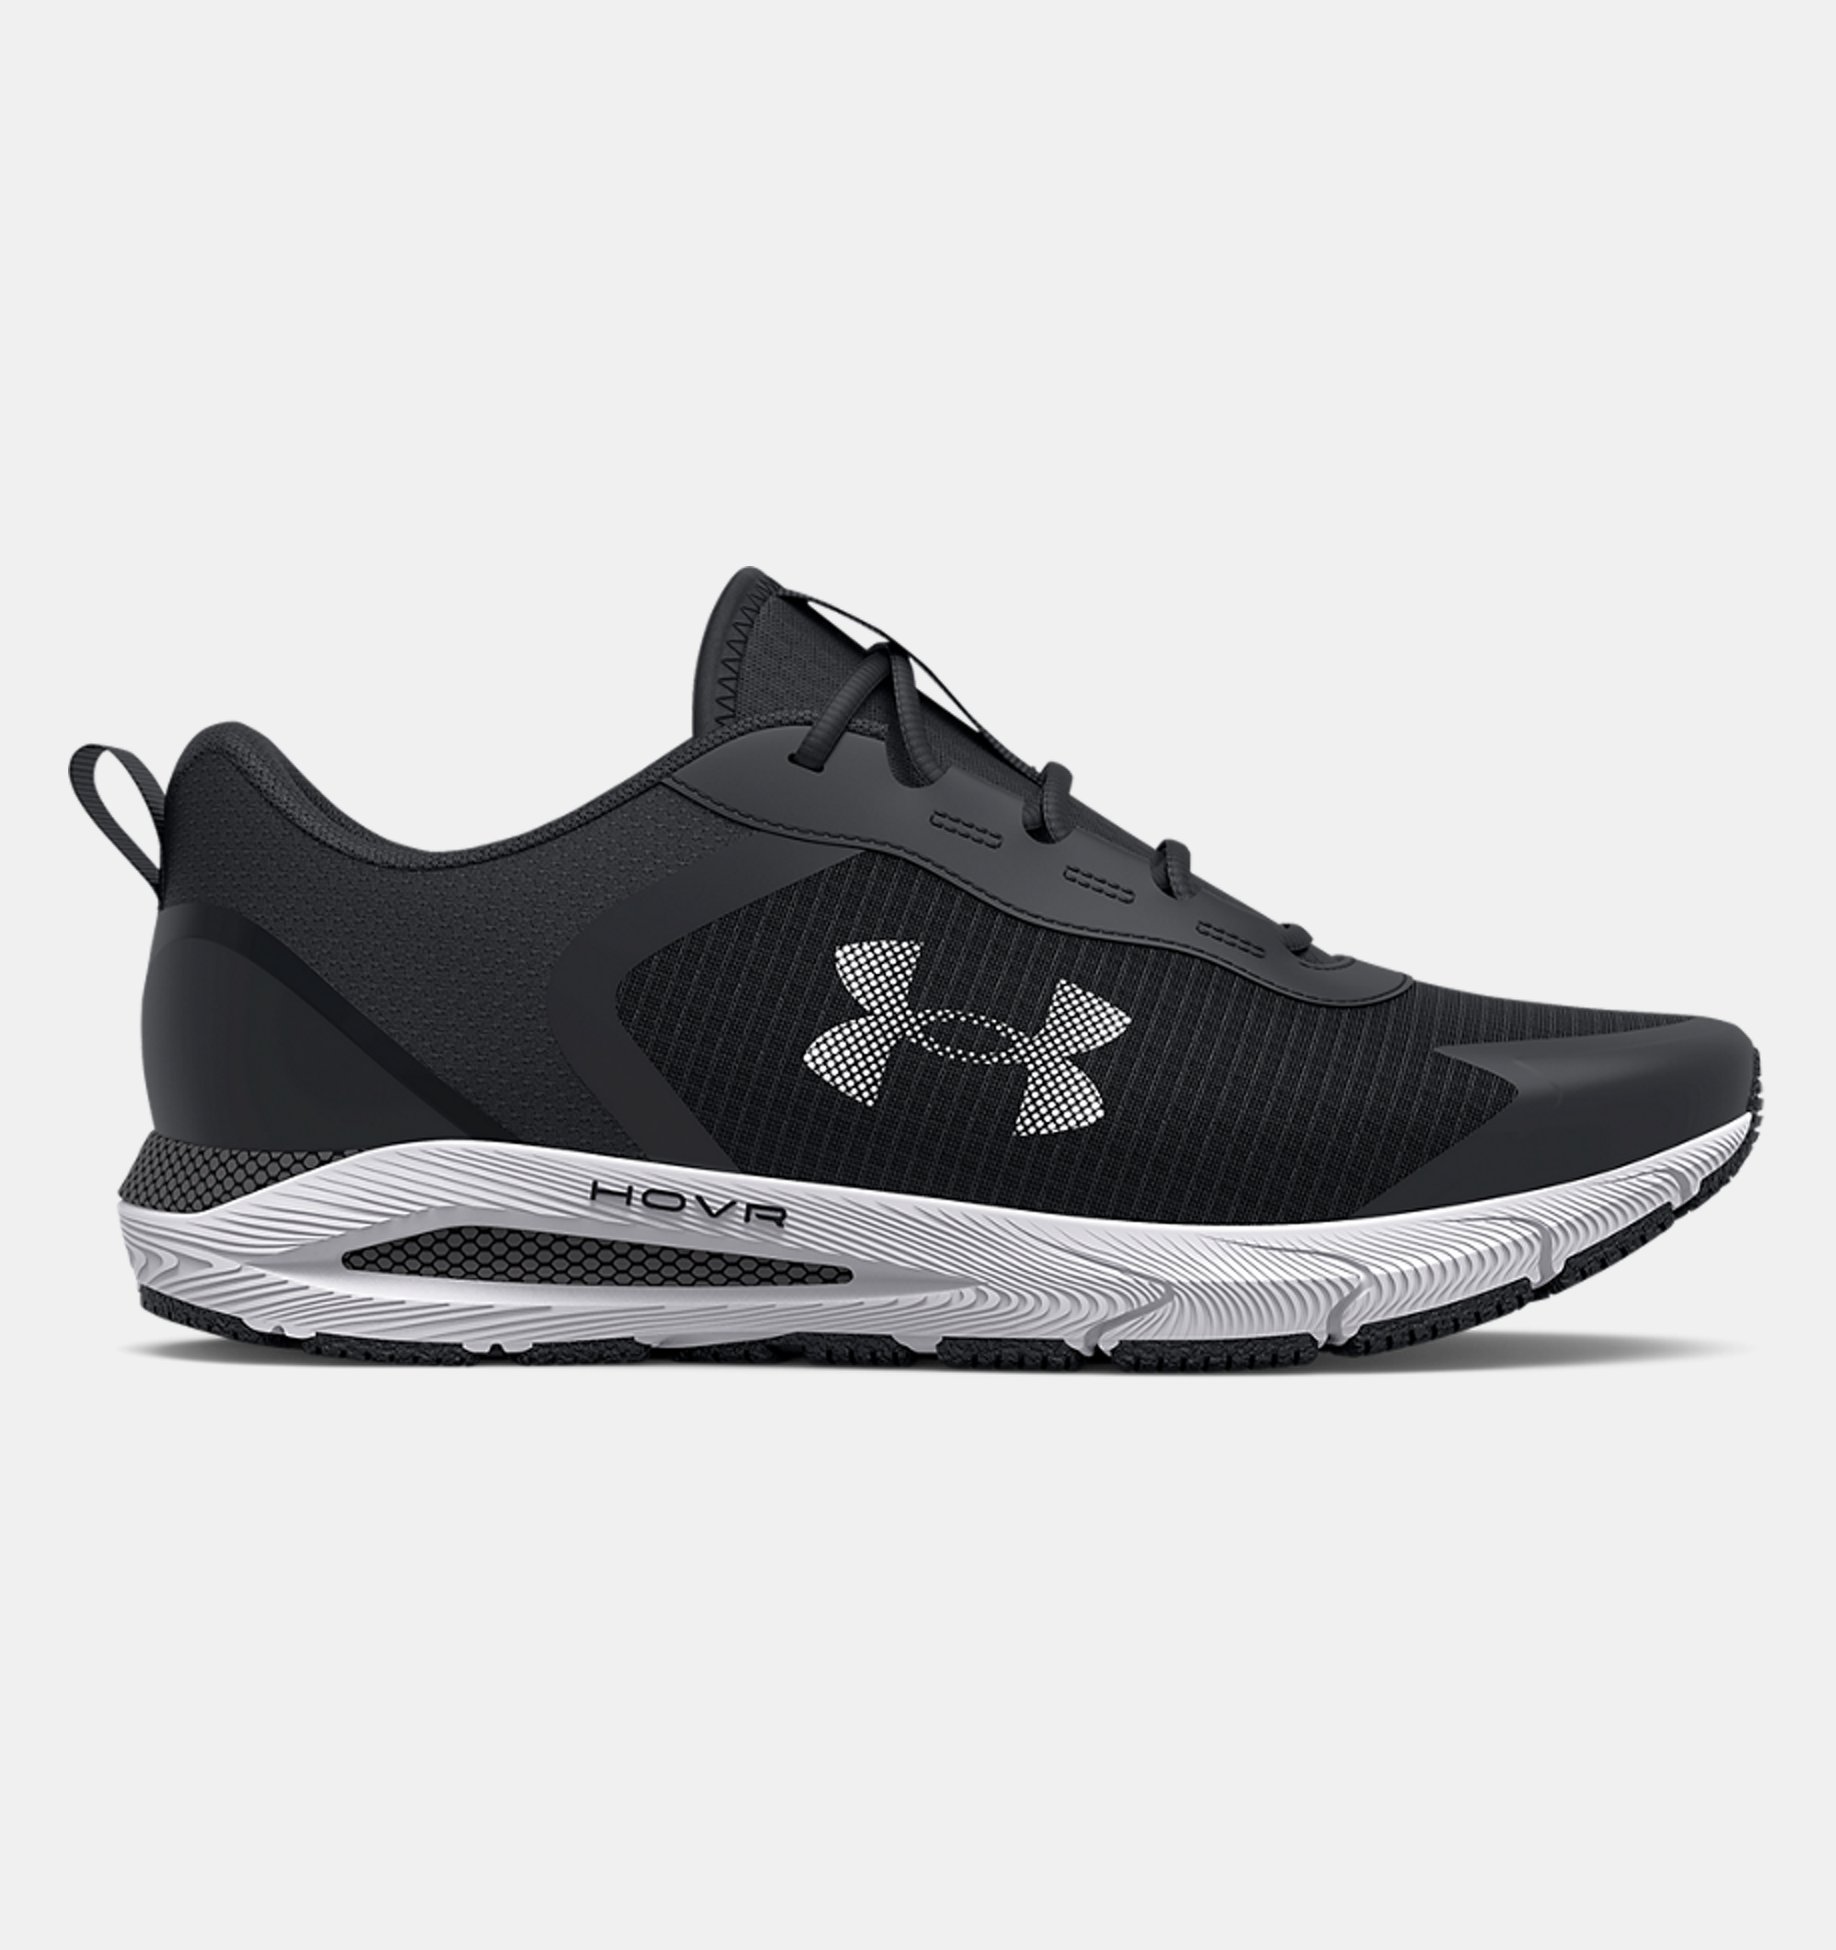 Under Armour Mens UA HOVR Sonic Running Shoes Footwear Sports Trainers Black 